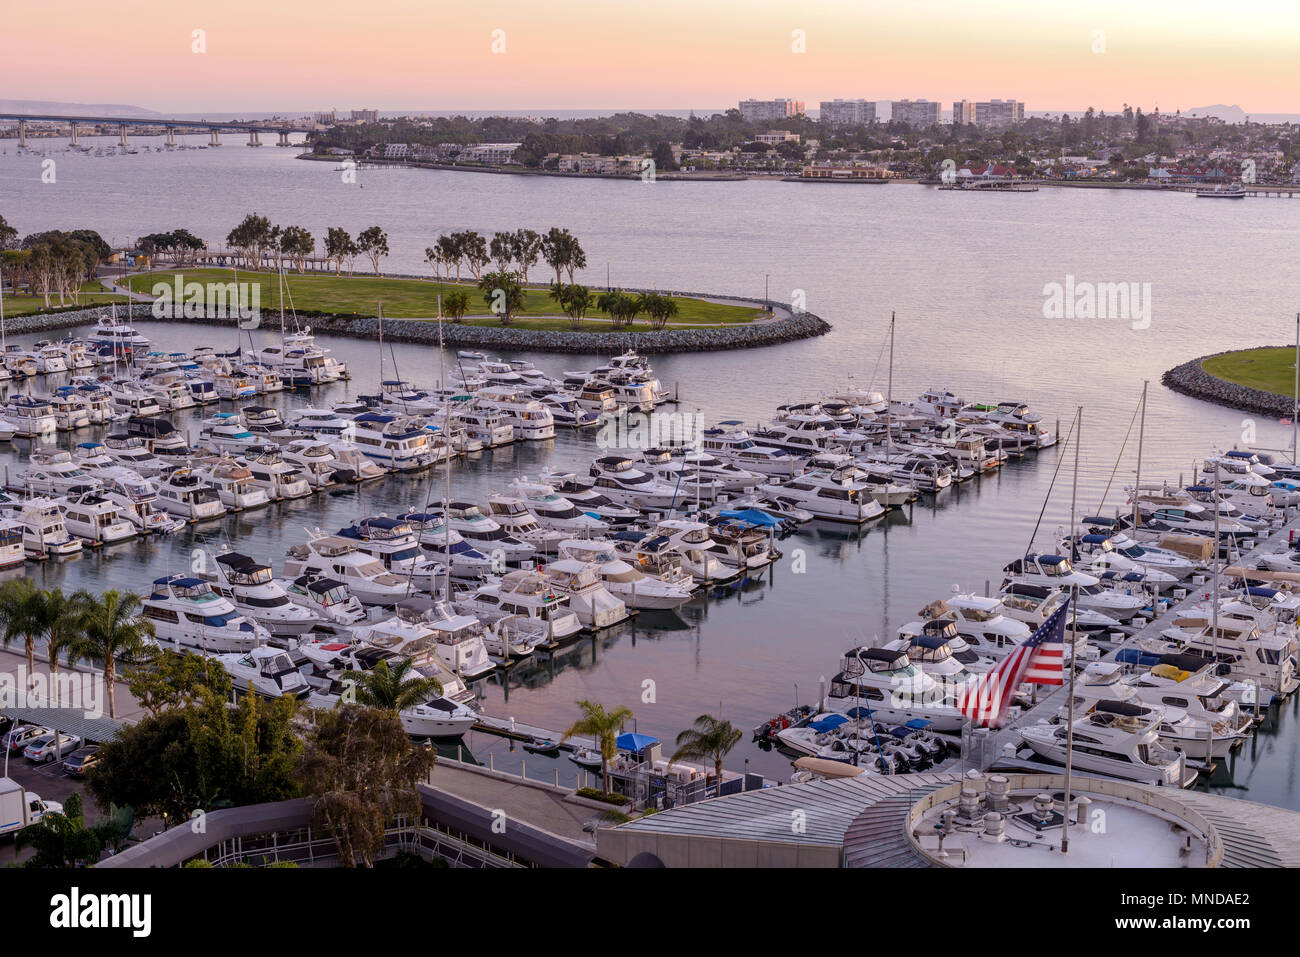 Sunset San Diego Bay - An aerial sunset view of San Diego Bay and San Diego Marina, with Coronado Bridge and Coronado Peninsula in background. CA, USA Stock Photo